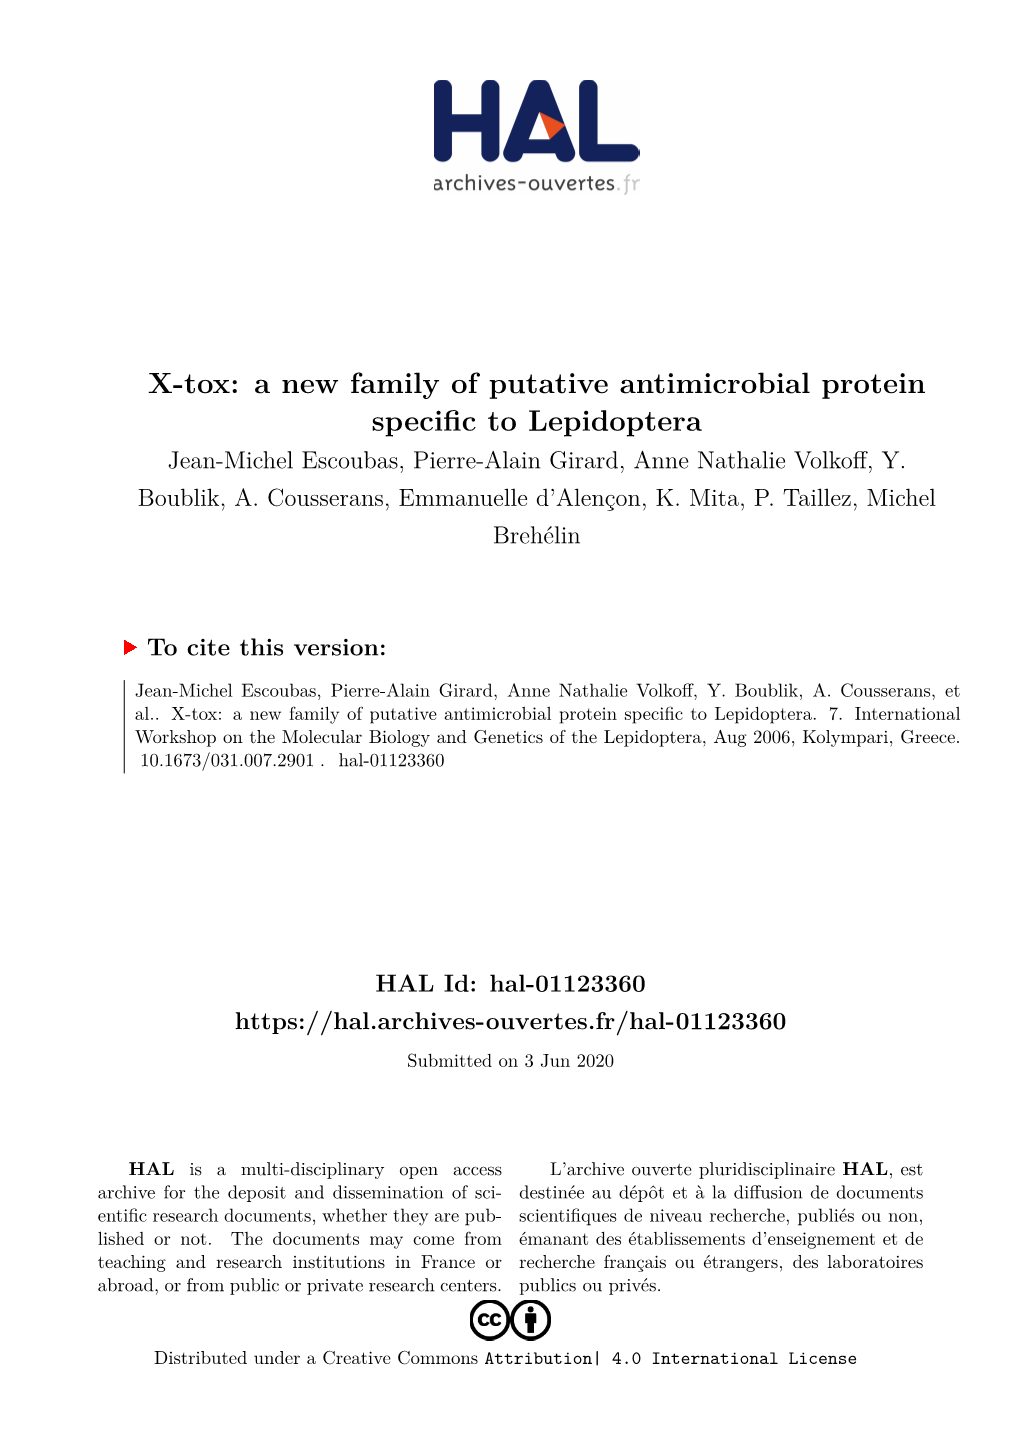 A New Family of Putative Antimicrobial Protein Specific to Lepidoptera Jean-Michel Escoubas, Pierre-Alain Girard, Anne Nathalie Volkoff, Y